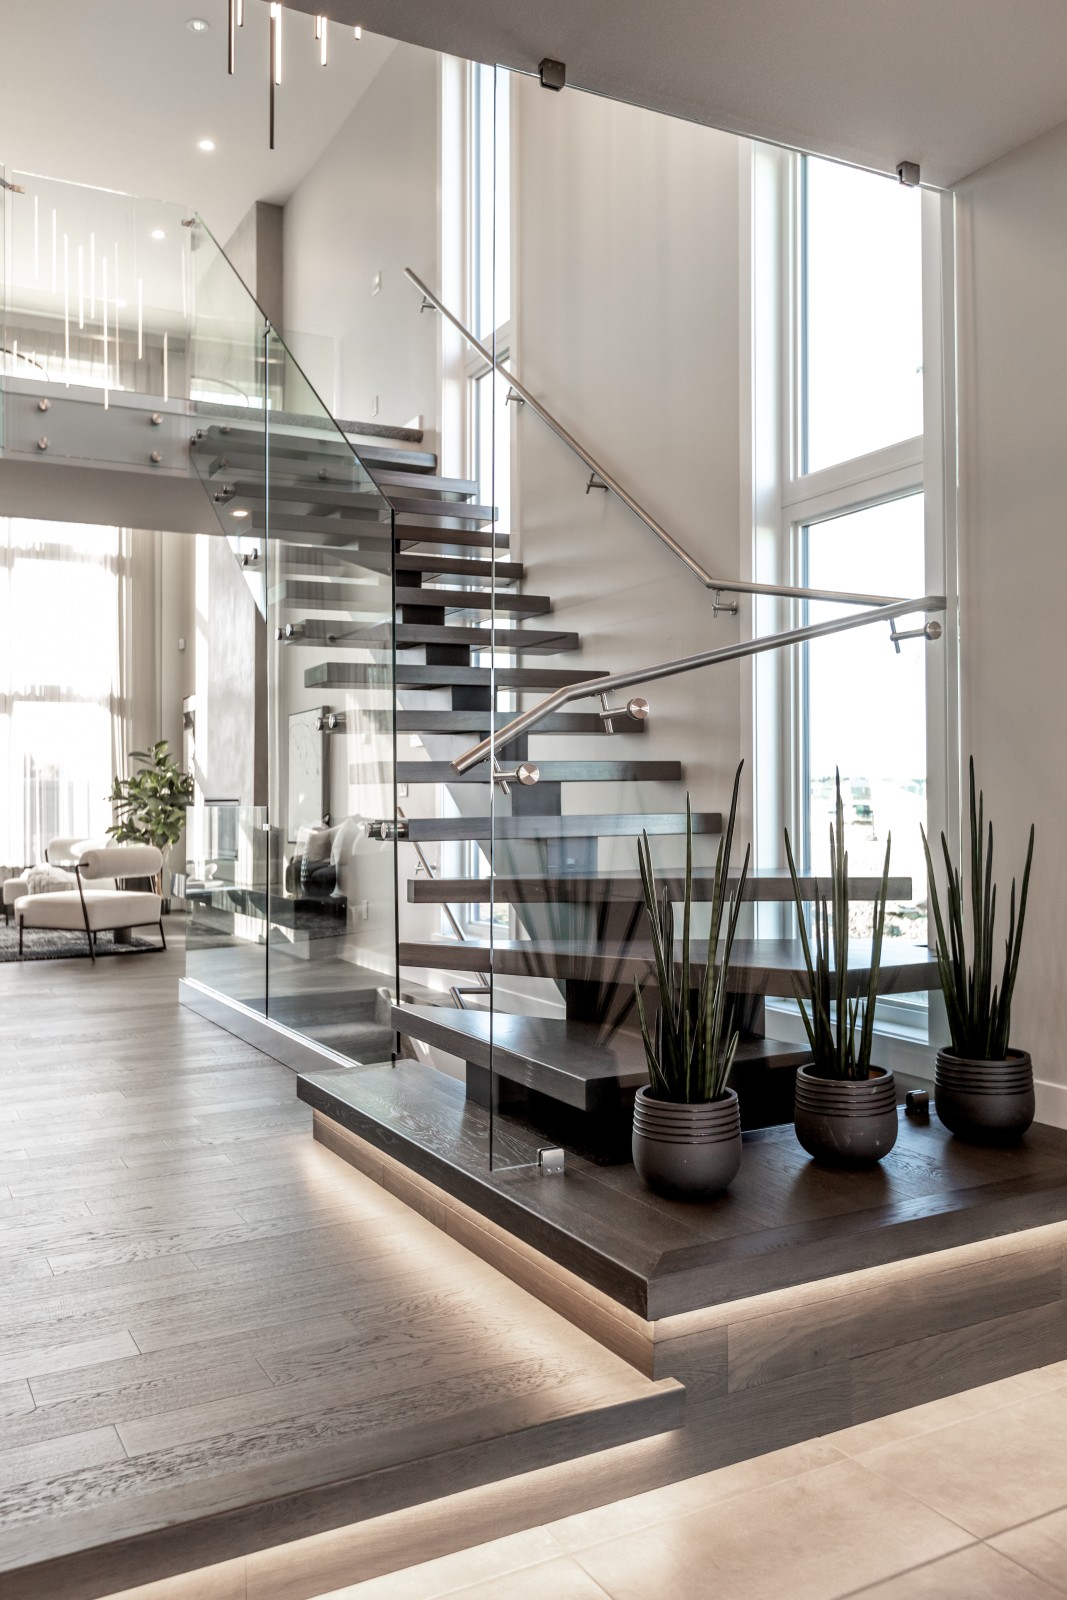 The modern staircase in the Cyrus showhome with open wood treads, steel spine, and glass rail and sleek steel handrail leads up to the second floor